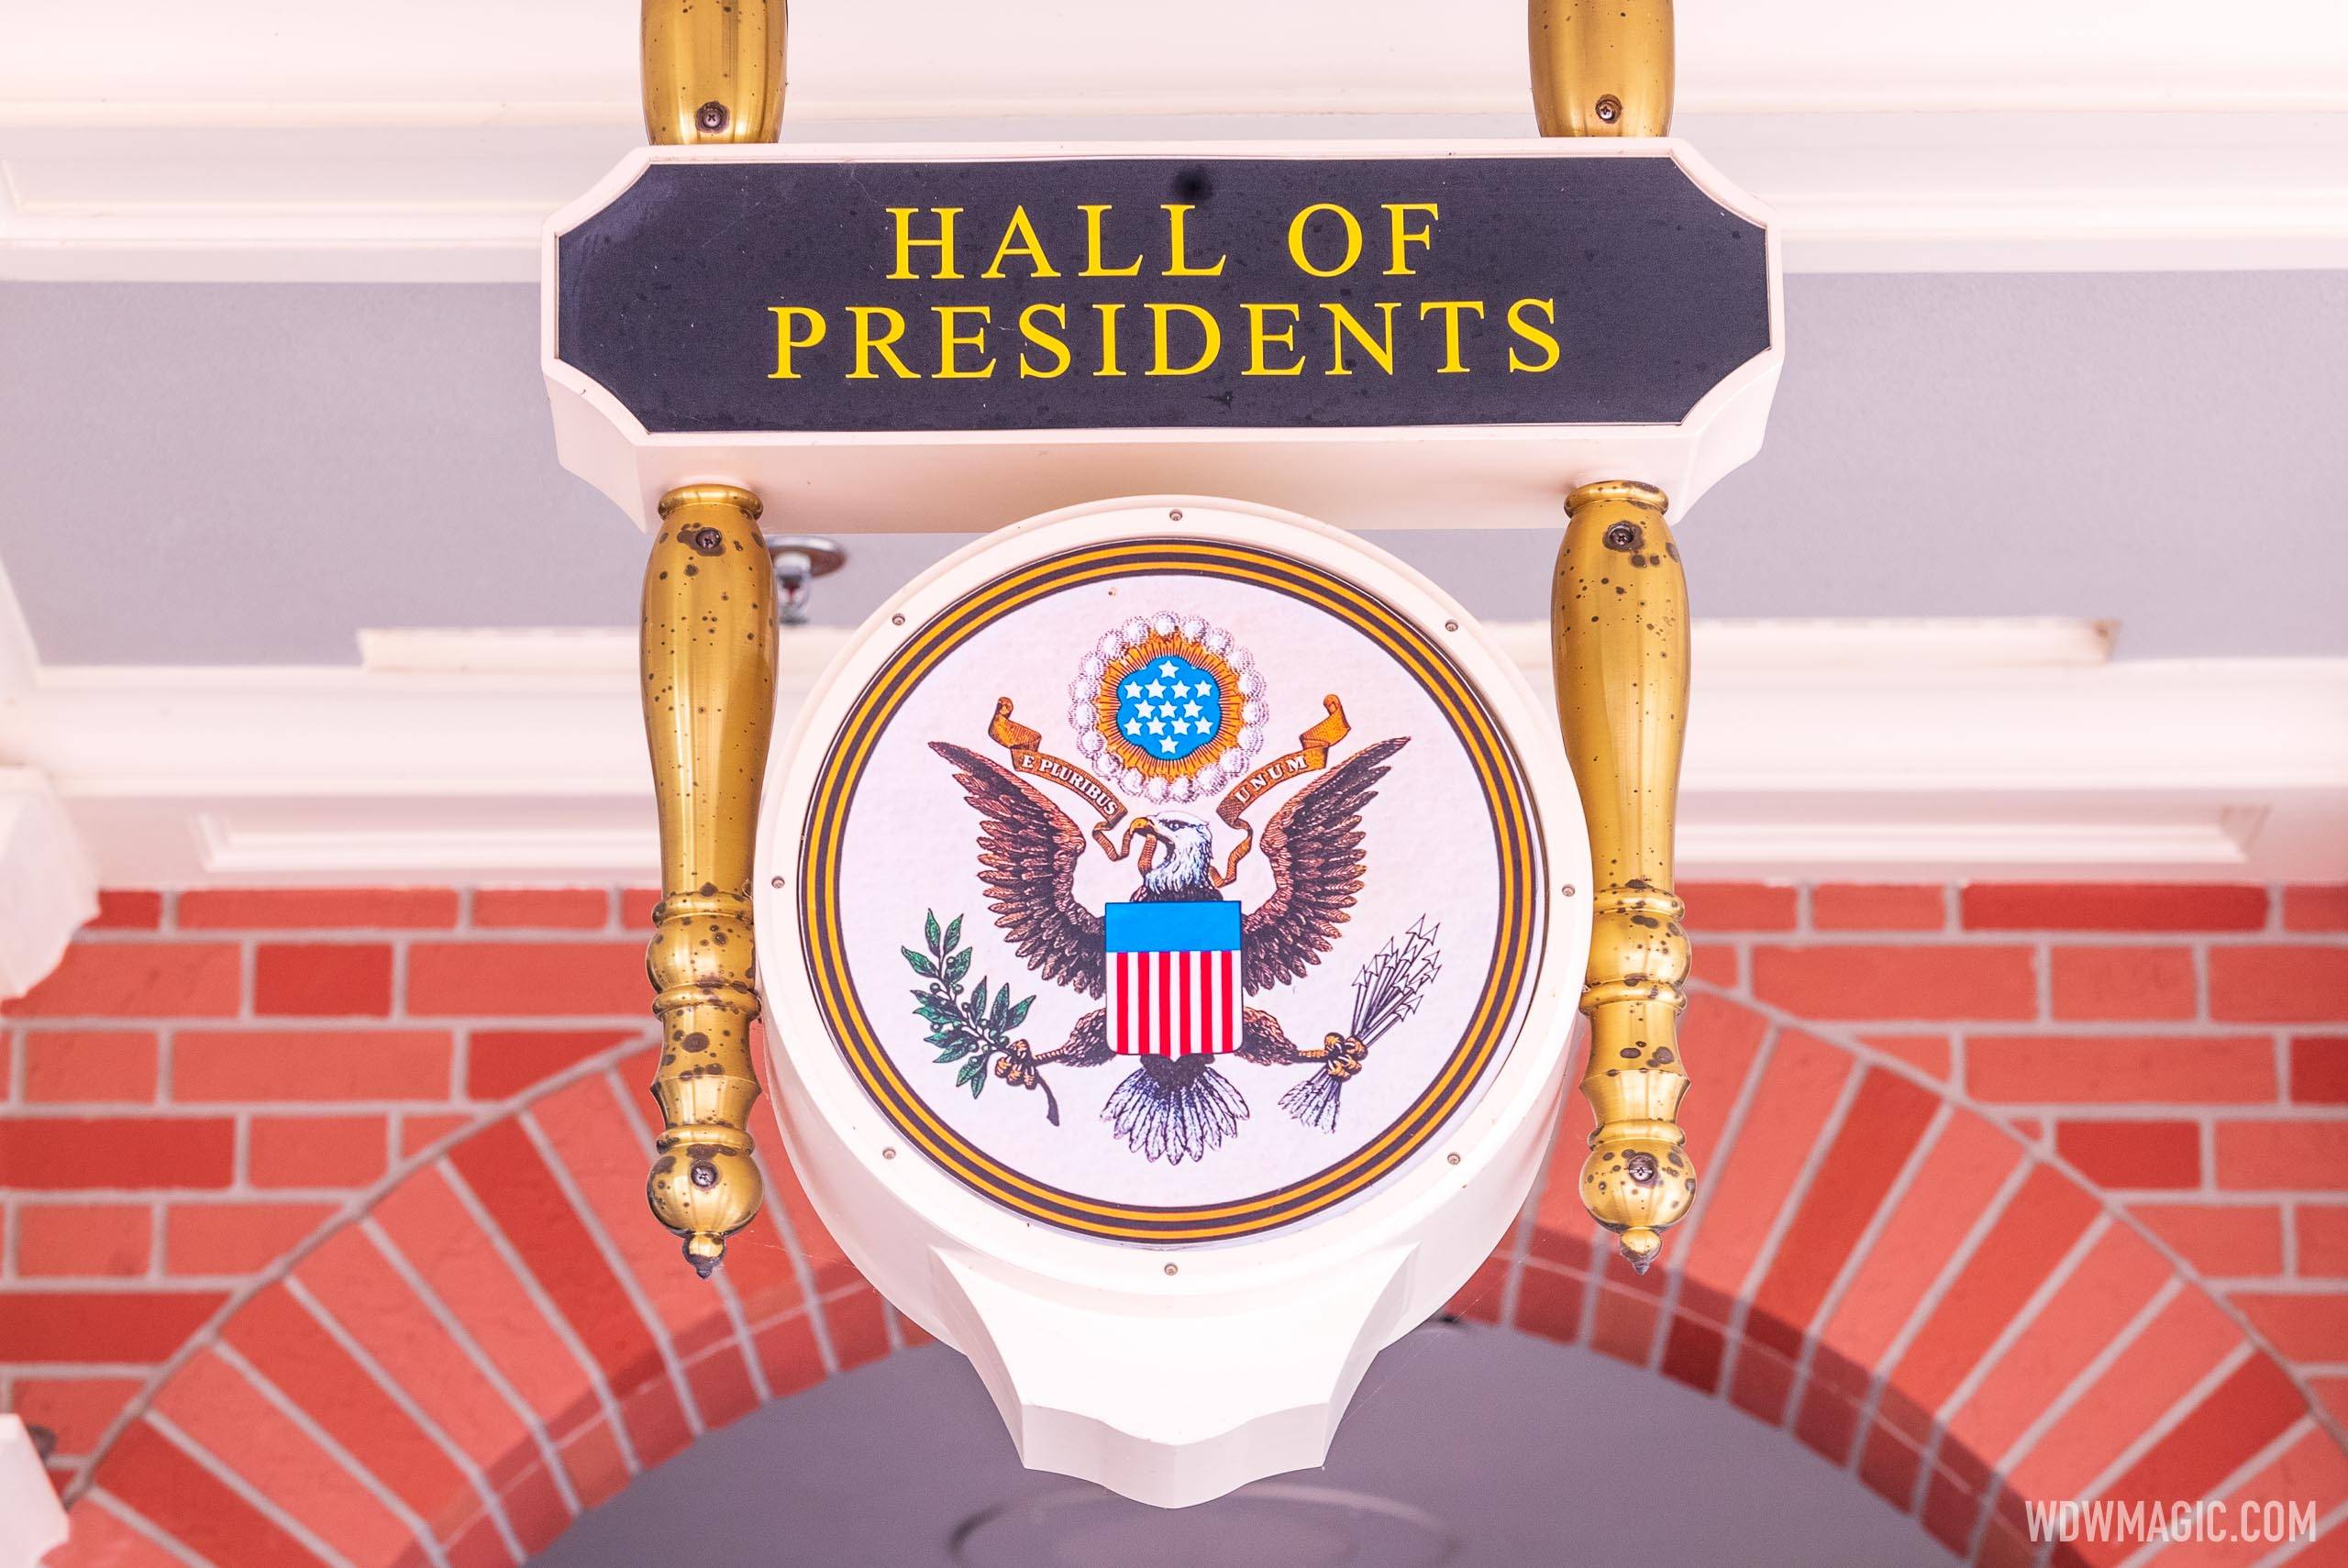 Signs outside The Hall of Presidents